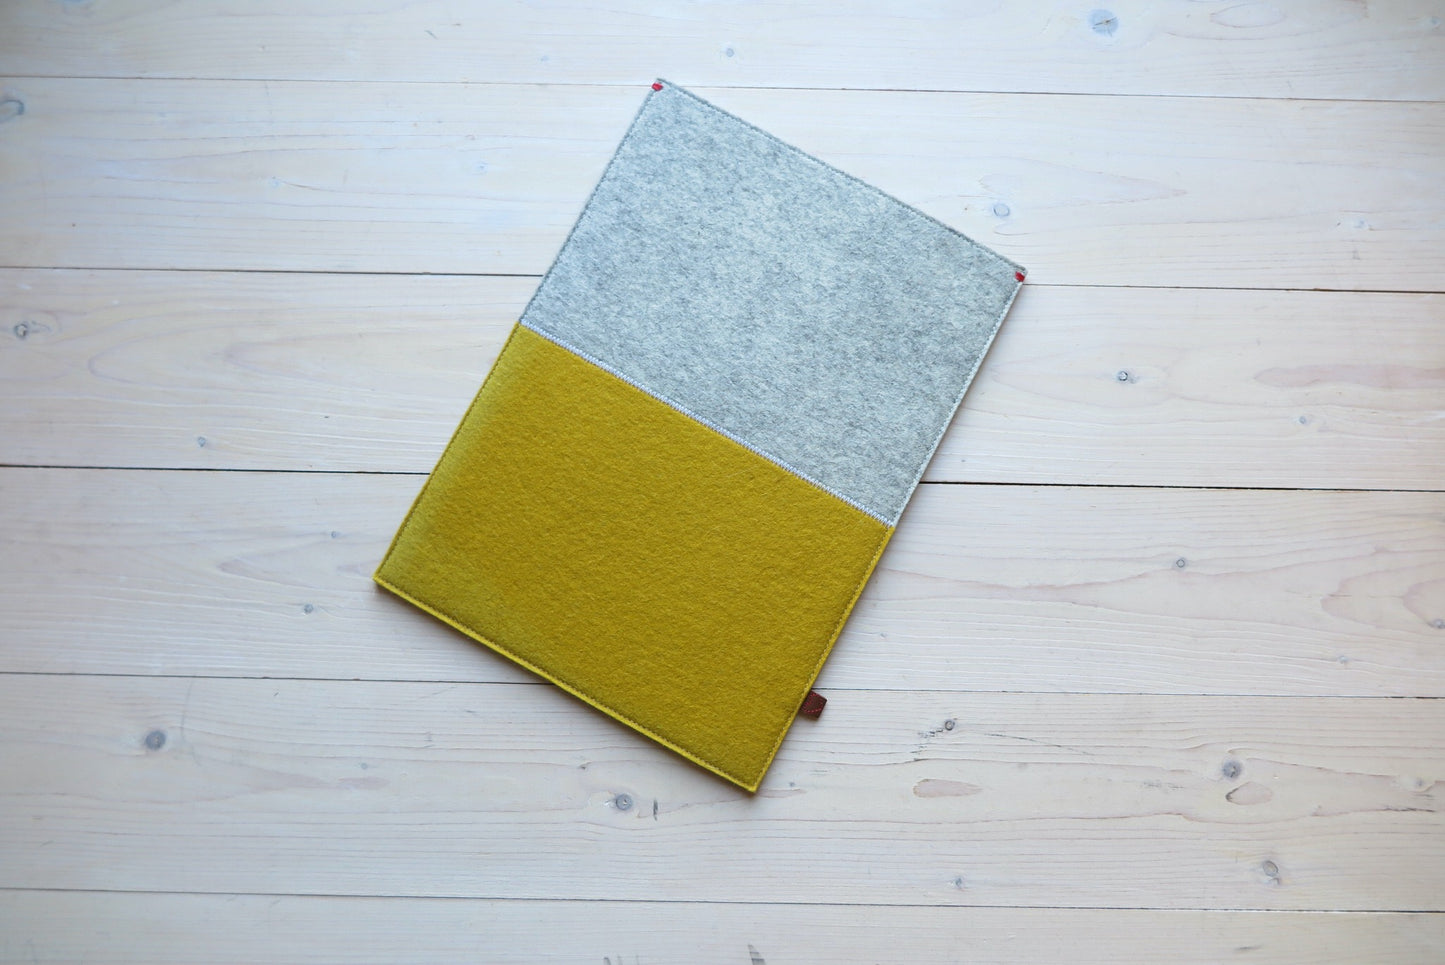 MacBook 13 "Vilten Hoes - The bestseller in yellow and gray in the sale